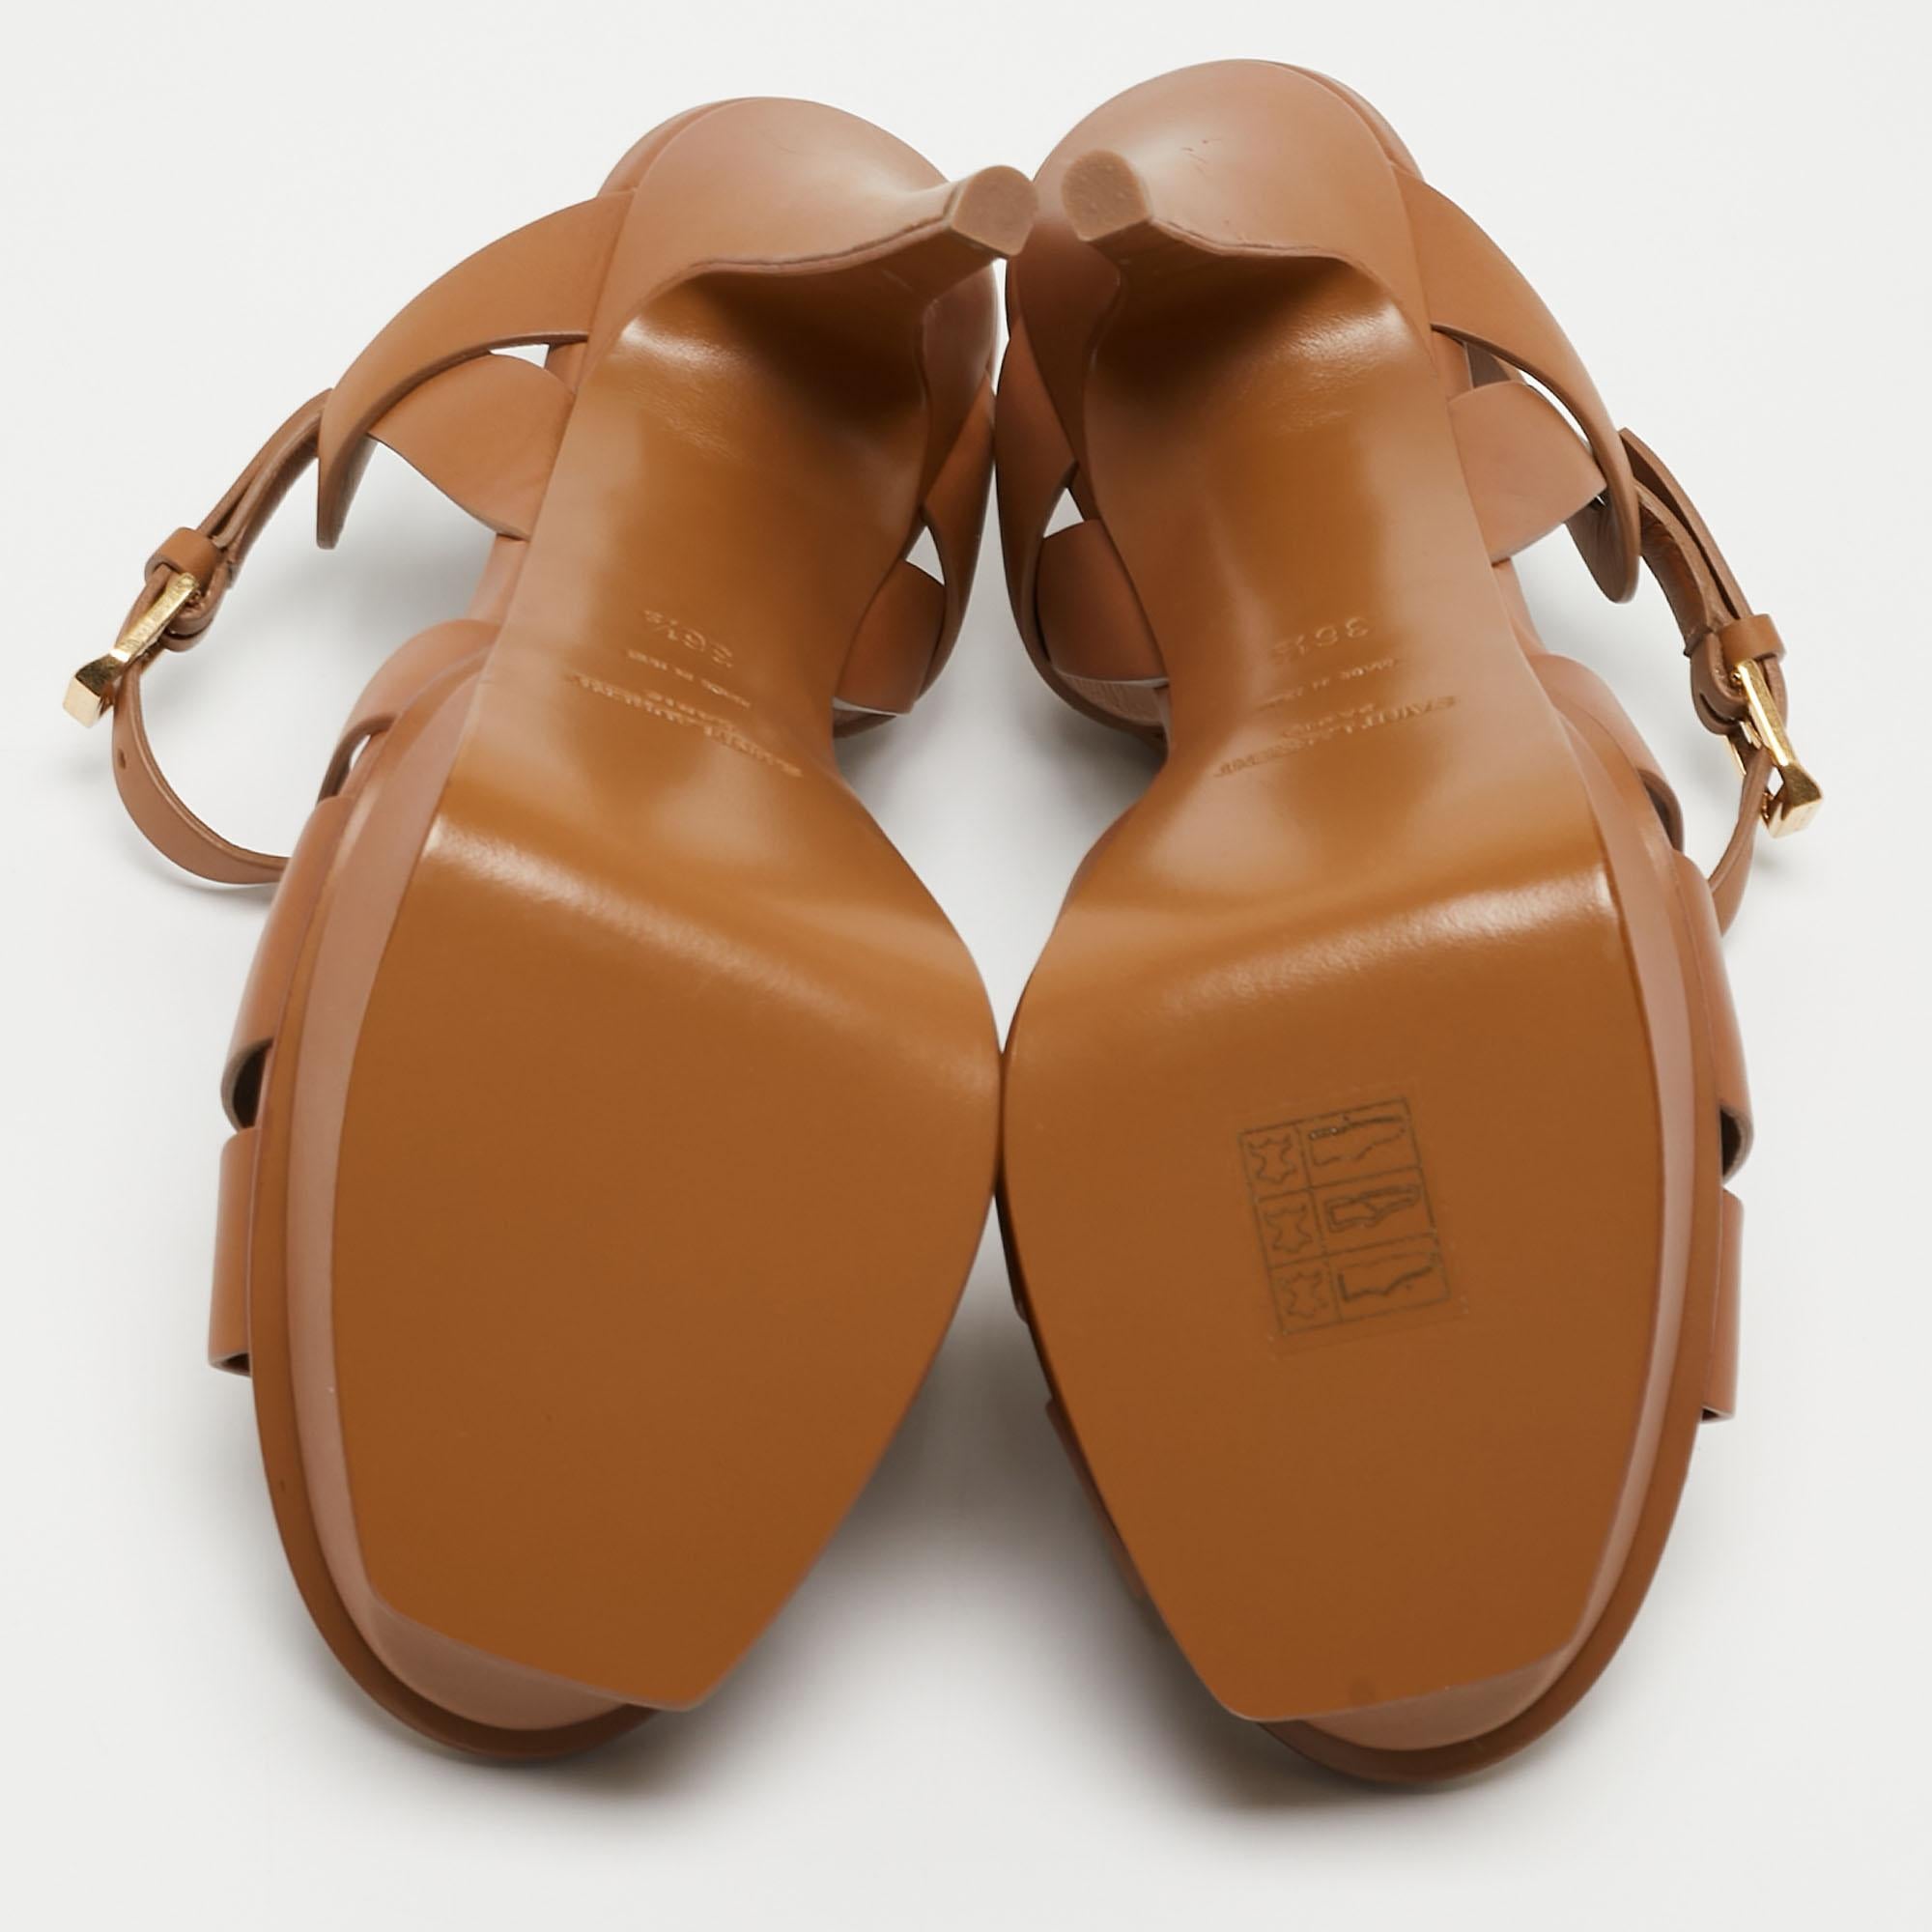 Yves Saint Laurent Brown Leather Tribute Sandals Size 36.5 5